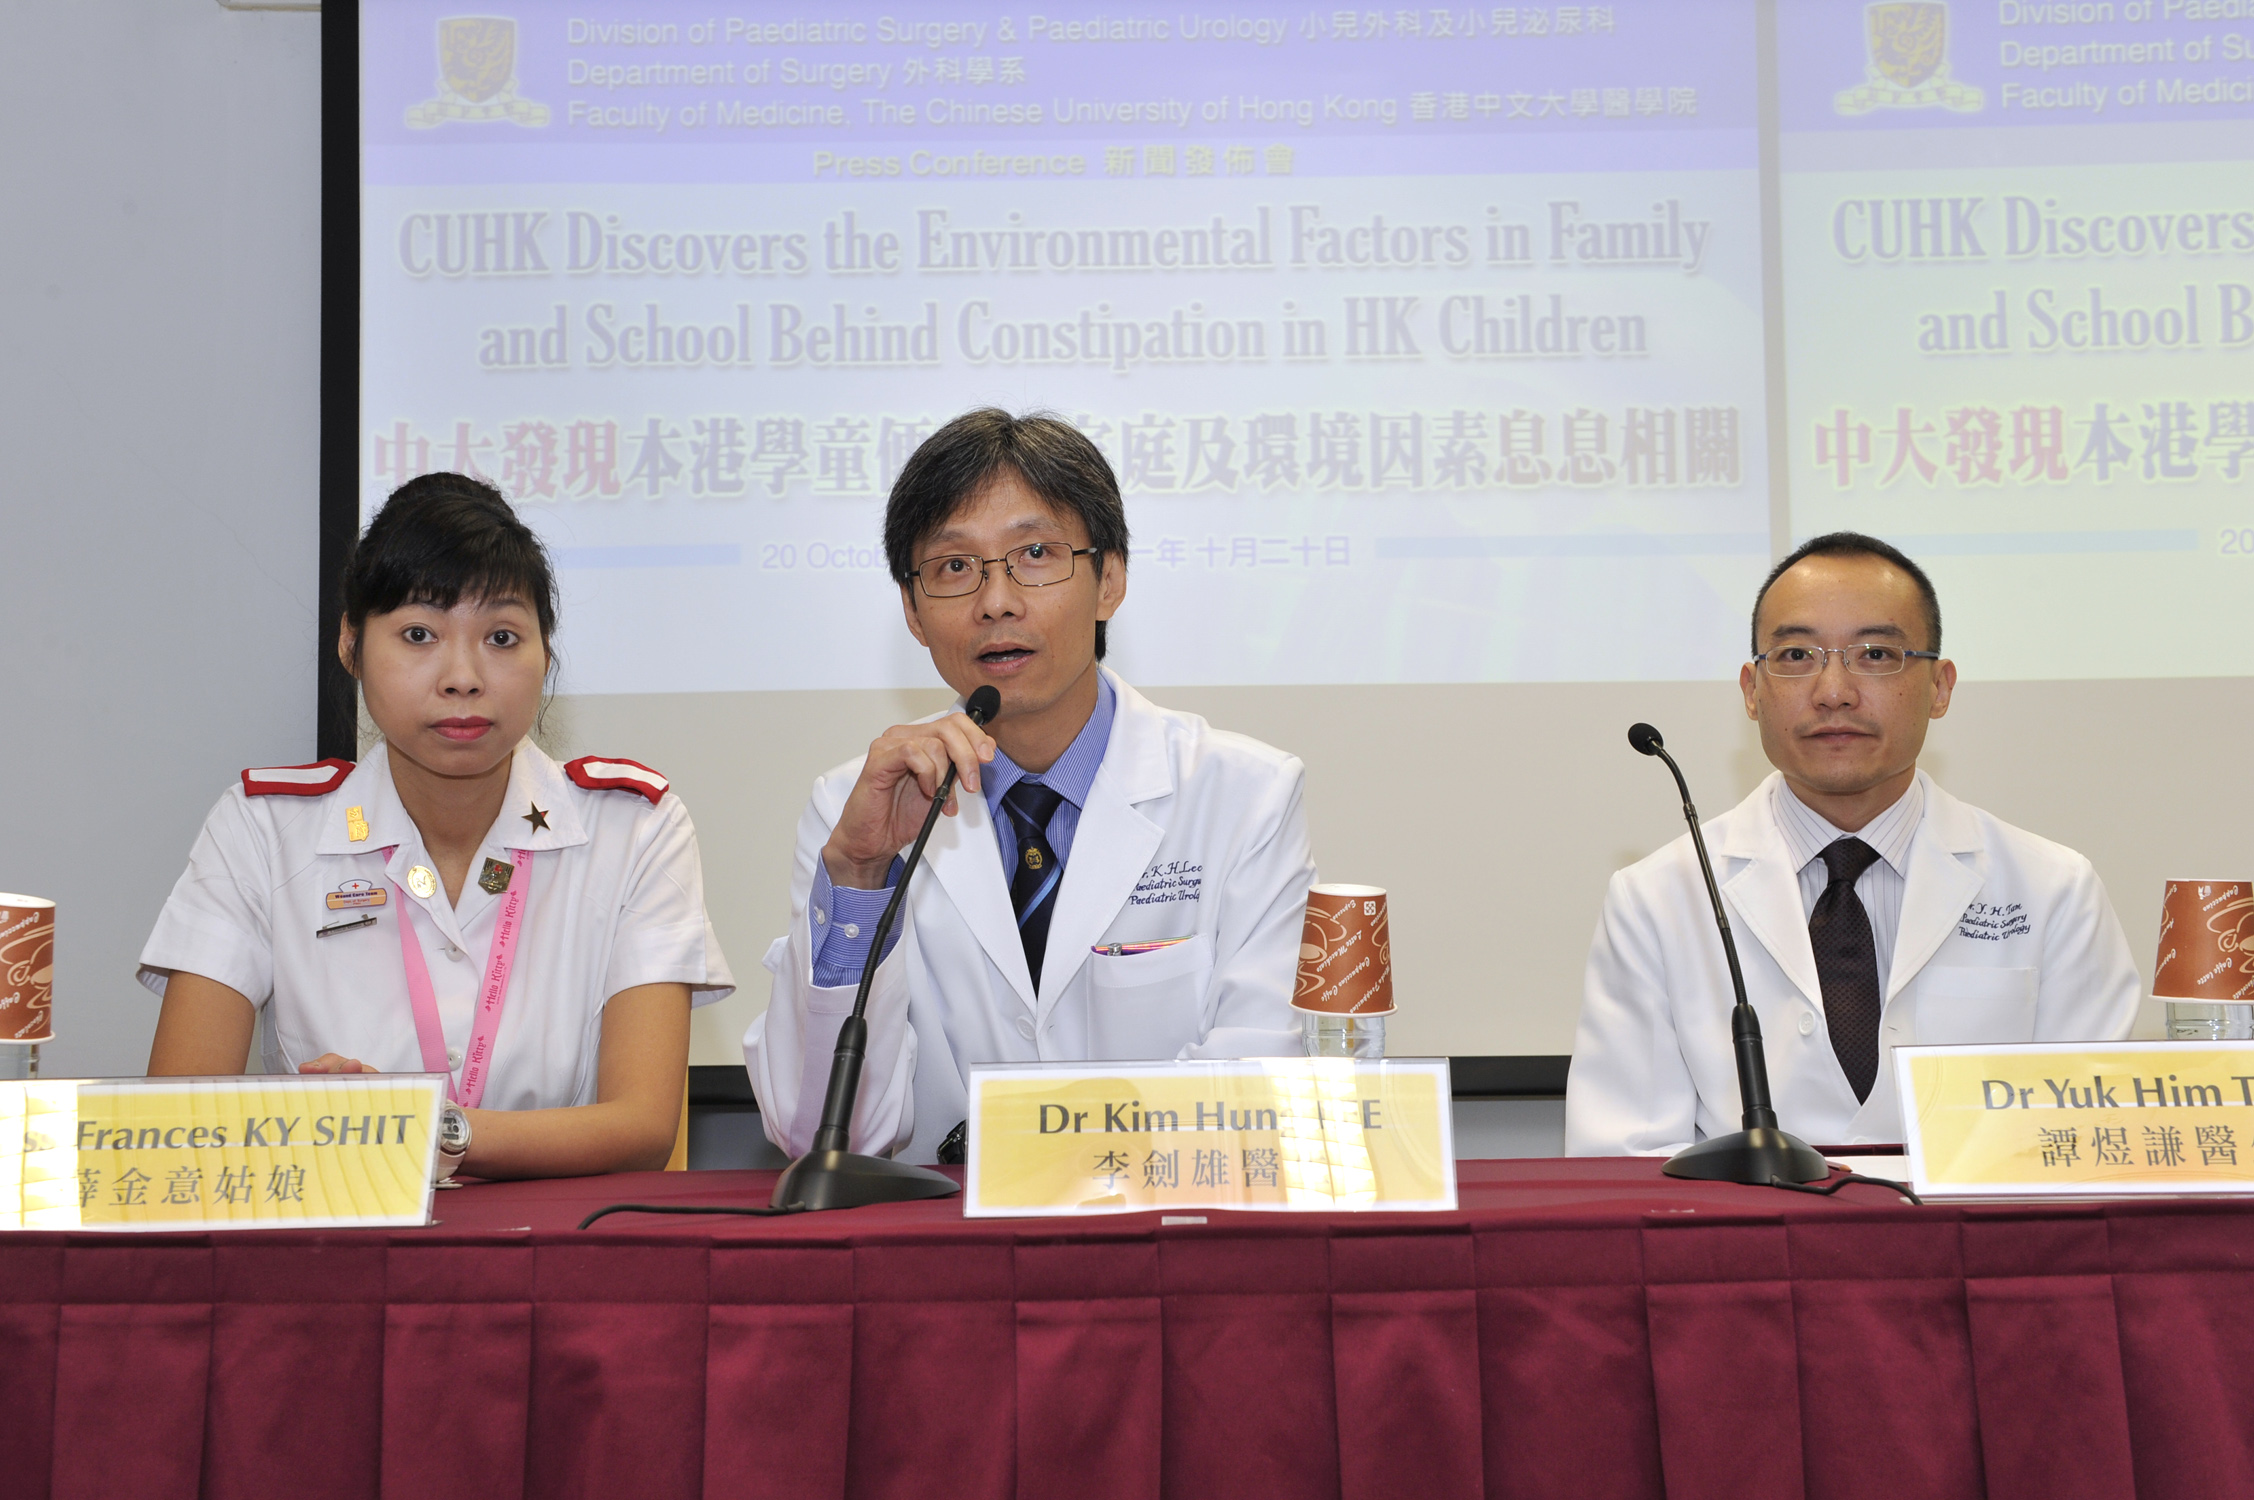 (from left) Miss Frances KY SHIT, Nurse Specialist, Department of Surgery, Prince of Wales Hospital; Dr Kim Hung LEE, Head of Division, Division of Paediatric Surgery and Paediatric Urology, Department of Surgery, CUHK and Dr Yuk Him TAM, Honorary Clinical Associate Professor, Division of Paediatric Surgery and Paediatric Urology, CUHK